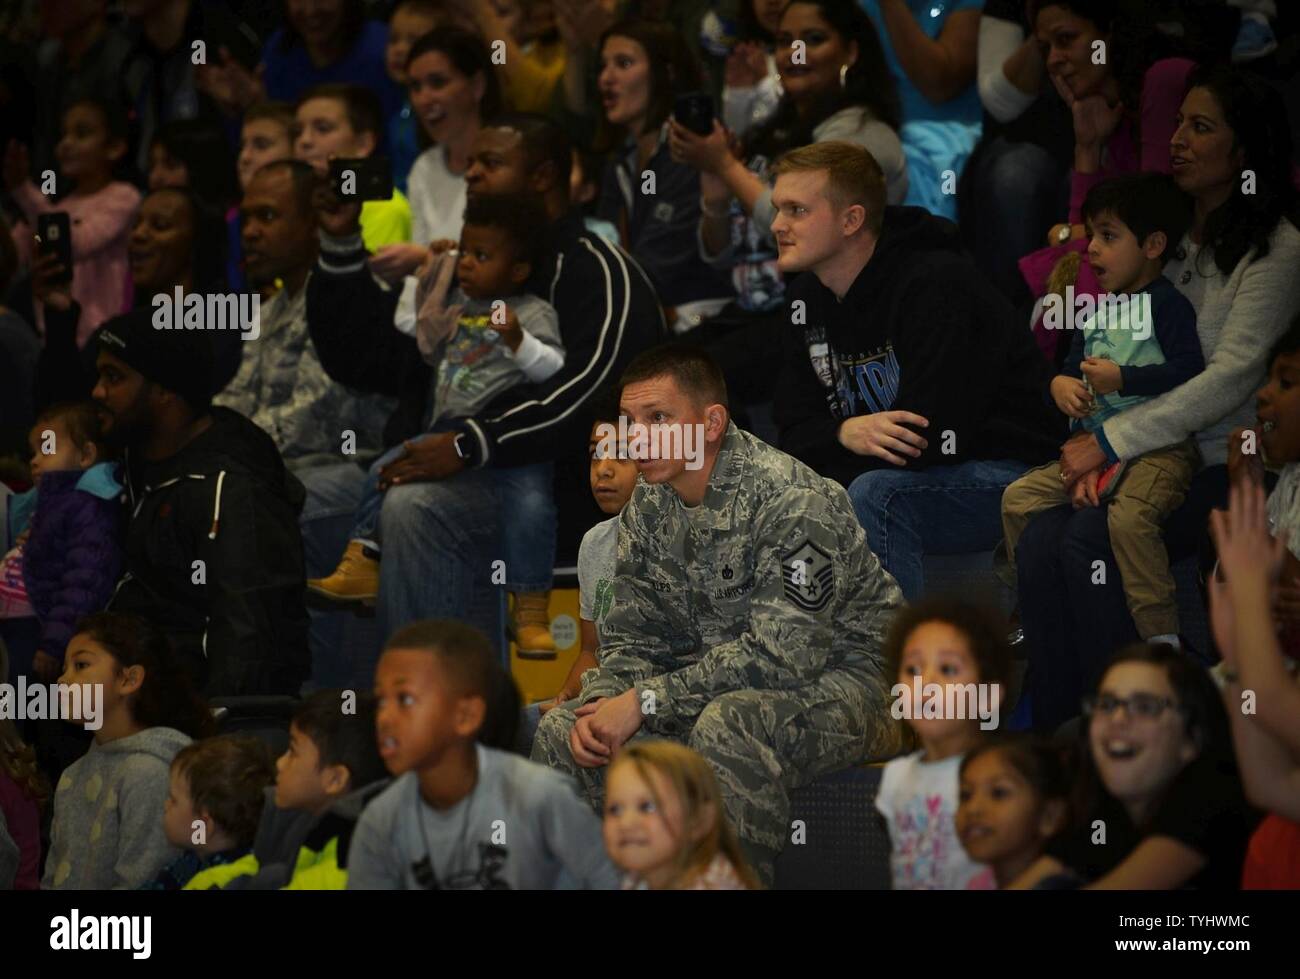 Airmen and their families watch a performance by the Harlem Globetrotters at Ramstein Air Base, Germany, Nov. 10, 2016. The basketball exhibition group has conducted tours for U.S. troops stationed overseas for more than ten years. Stock Photo